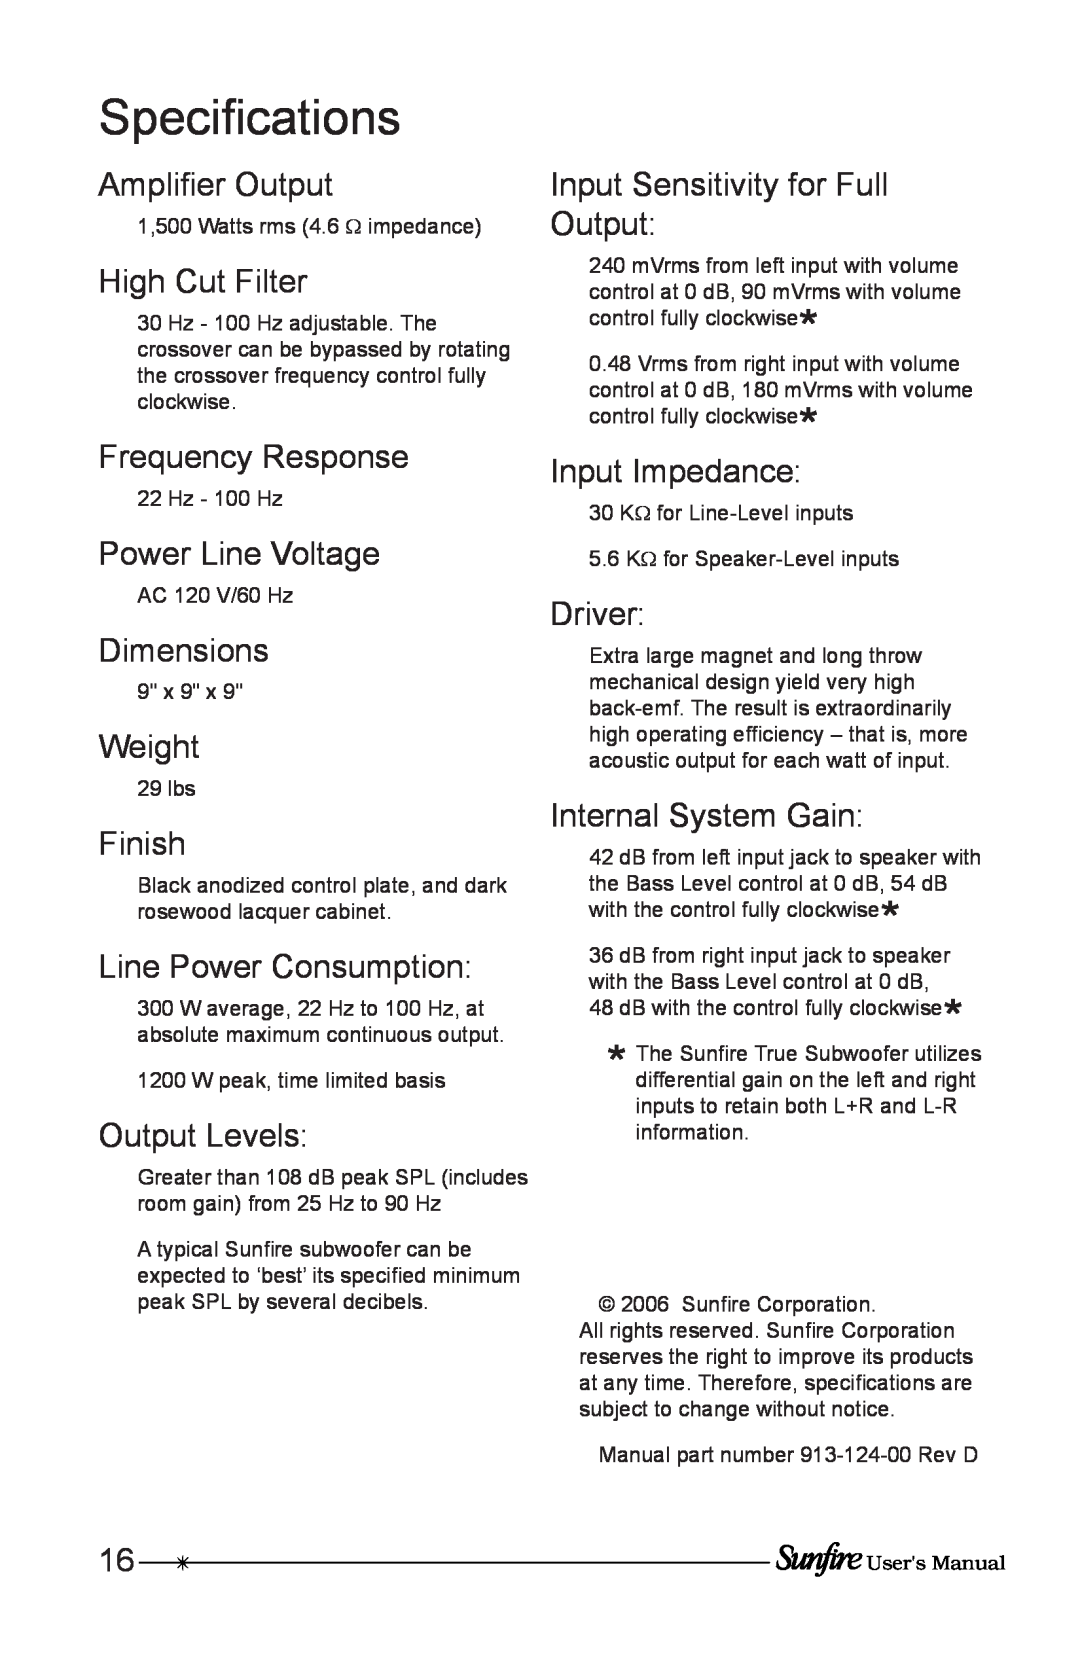 Sunfire Home Theater System manual Speciﬁcations 